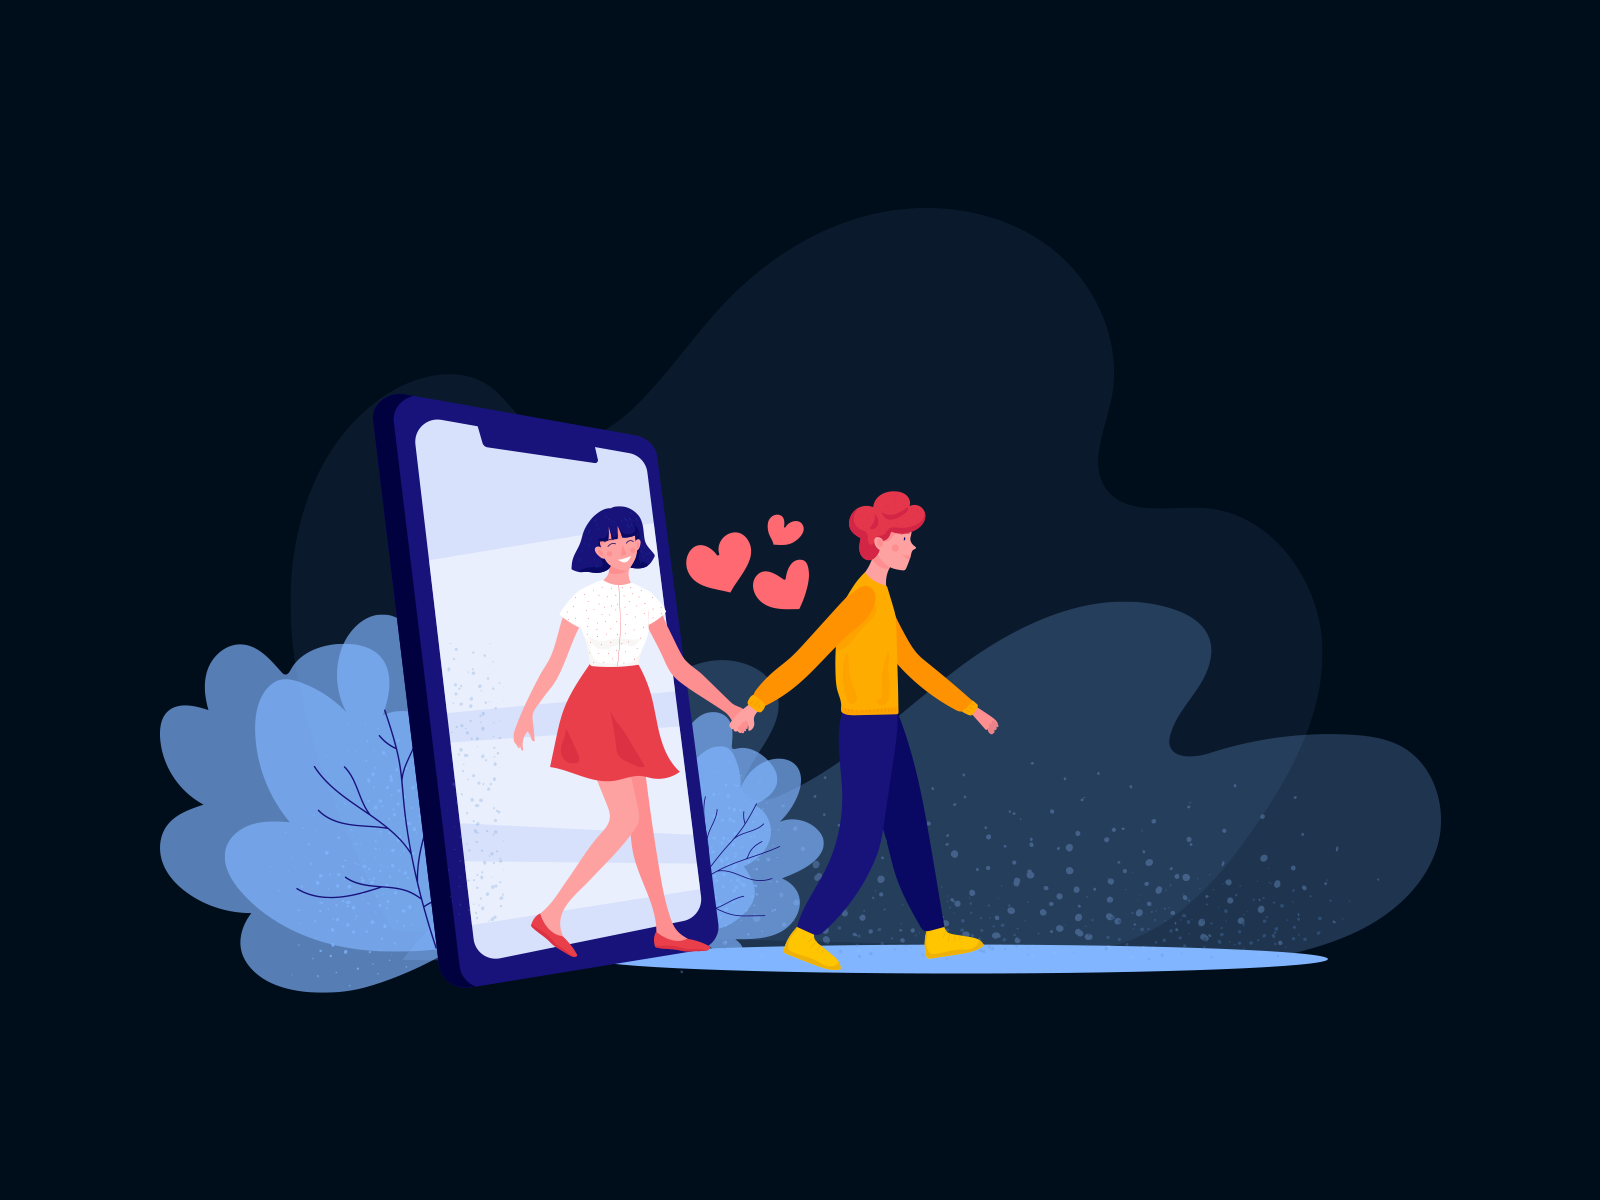 A woman and a man holding hands as they walk out of a smartphone screen surrounded by hearts.